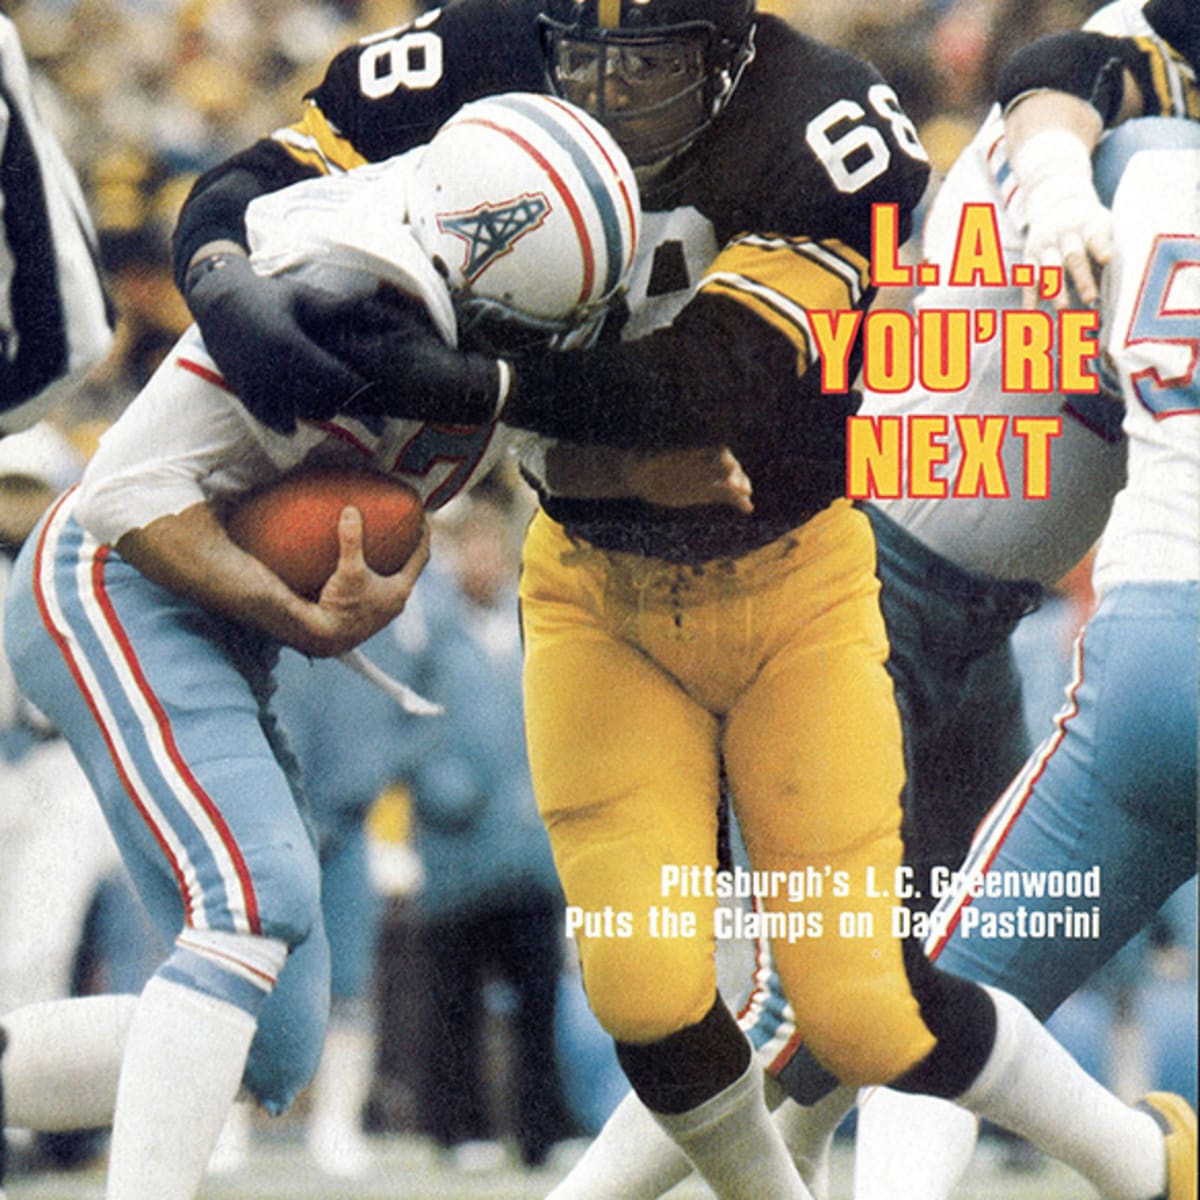 April 28, 1980 Table Of Contents - Sports Illustrated Vault